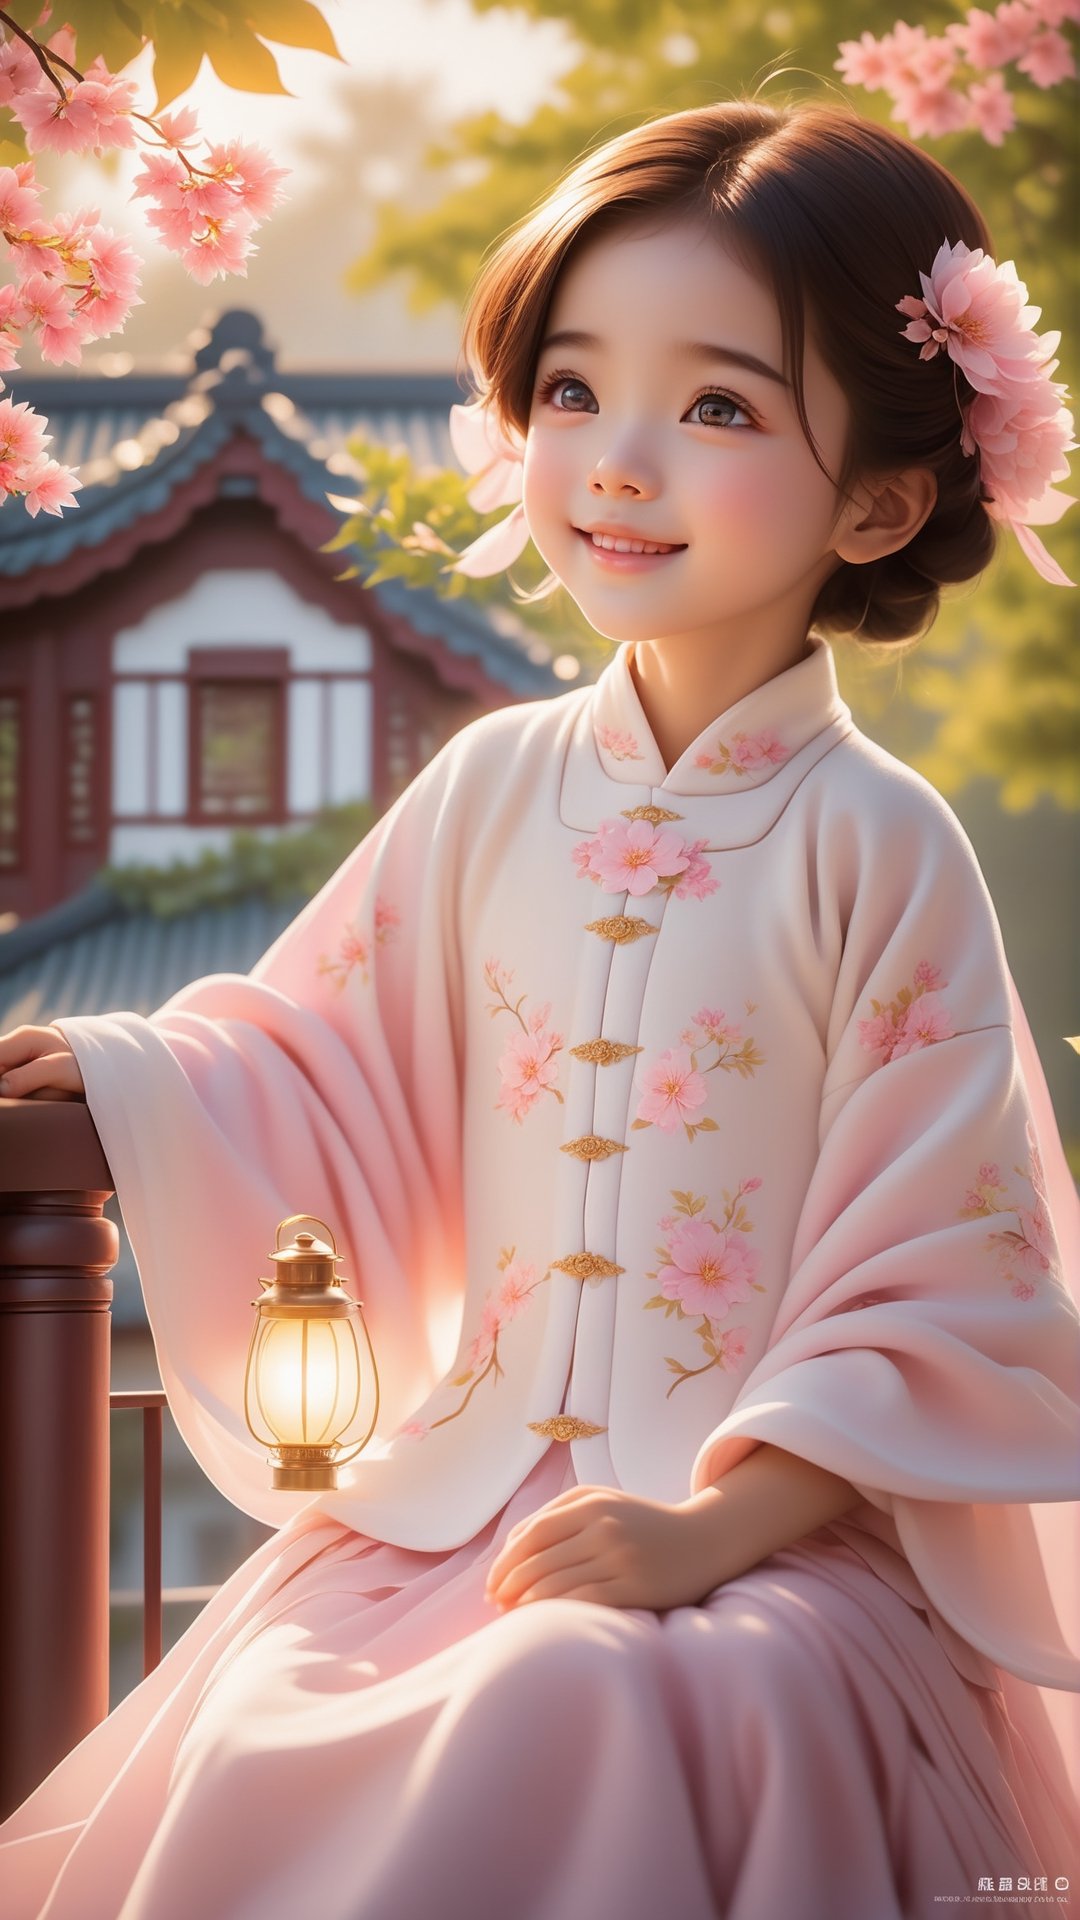 Pixar animated movie scene style, Chinese house style, in the morning light, pink flowers bloom and maple tree bloom, sunray through the leaves, a beautiful and cute little girl with beautiful eyes, sitting on the railing, perfect face, smiling happily, 32k ultra high definition, Pixar movie scene style, realistic high quality Portrait photography, eternal beauty, the lantern behind her emits a soft light, beautiful and dreamy, the flowers are in bloom, and the light bokeh serves as the background.